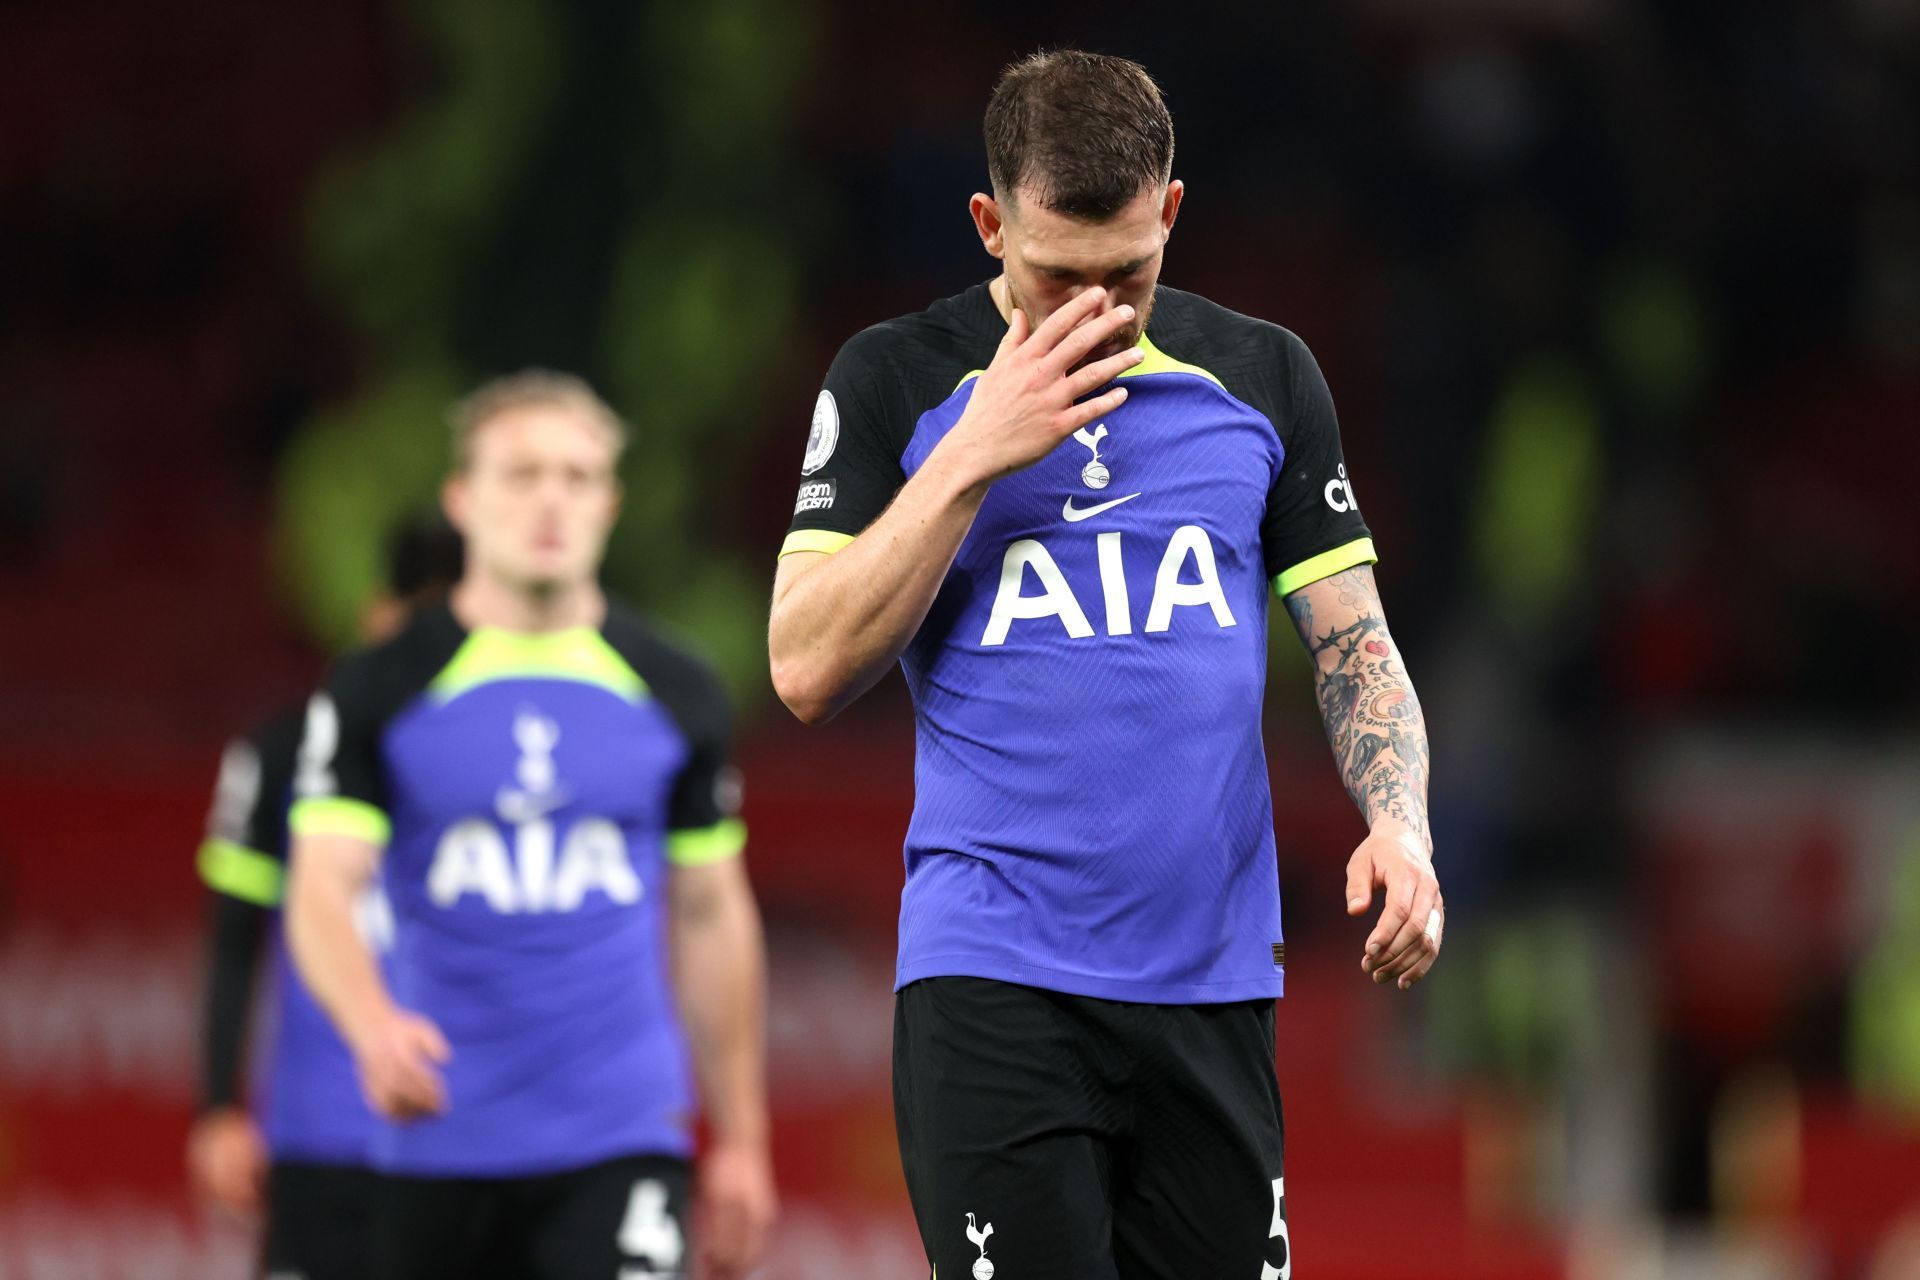 Tottenham endured a night to forget